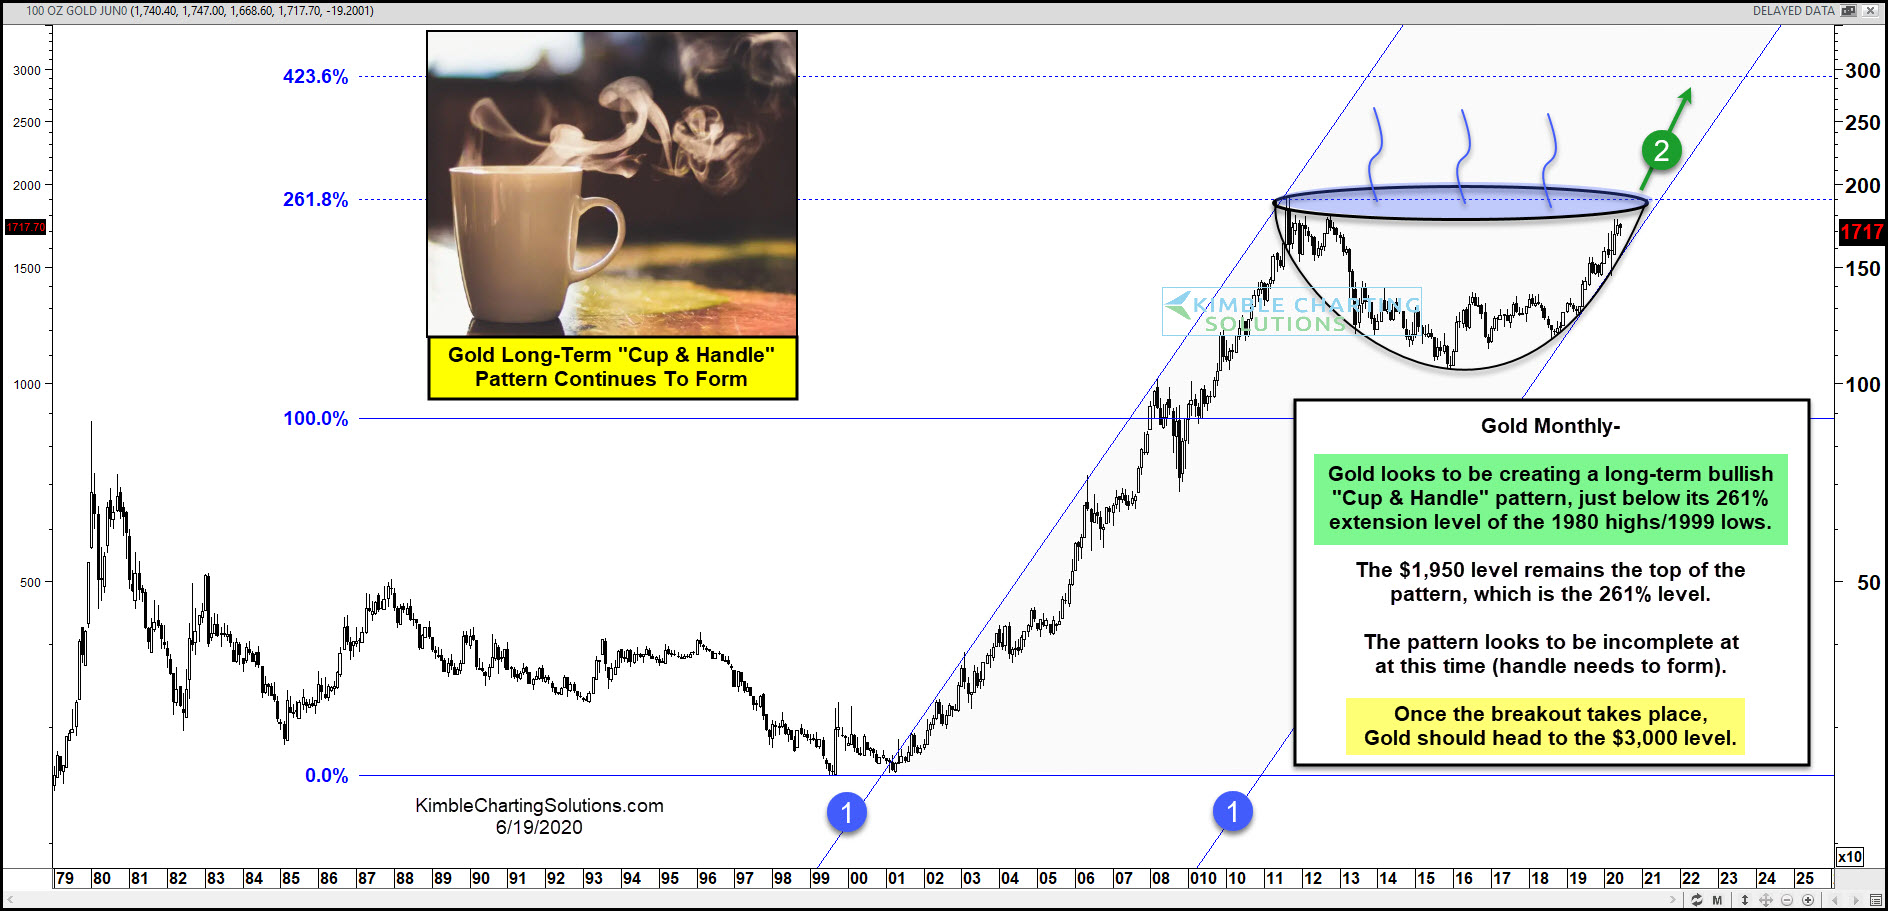 Gold Bulls Eyeing Potential Cup & Handle Pattern | Kimble Charting